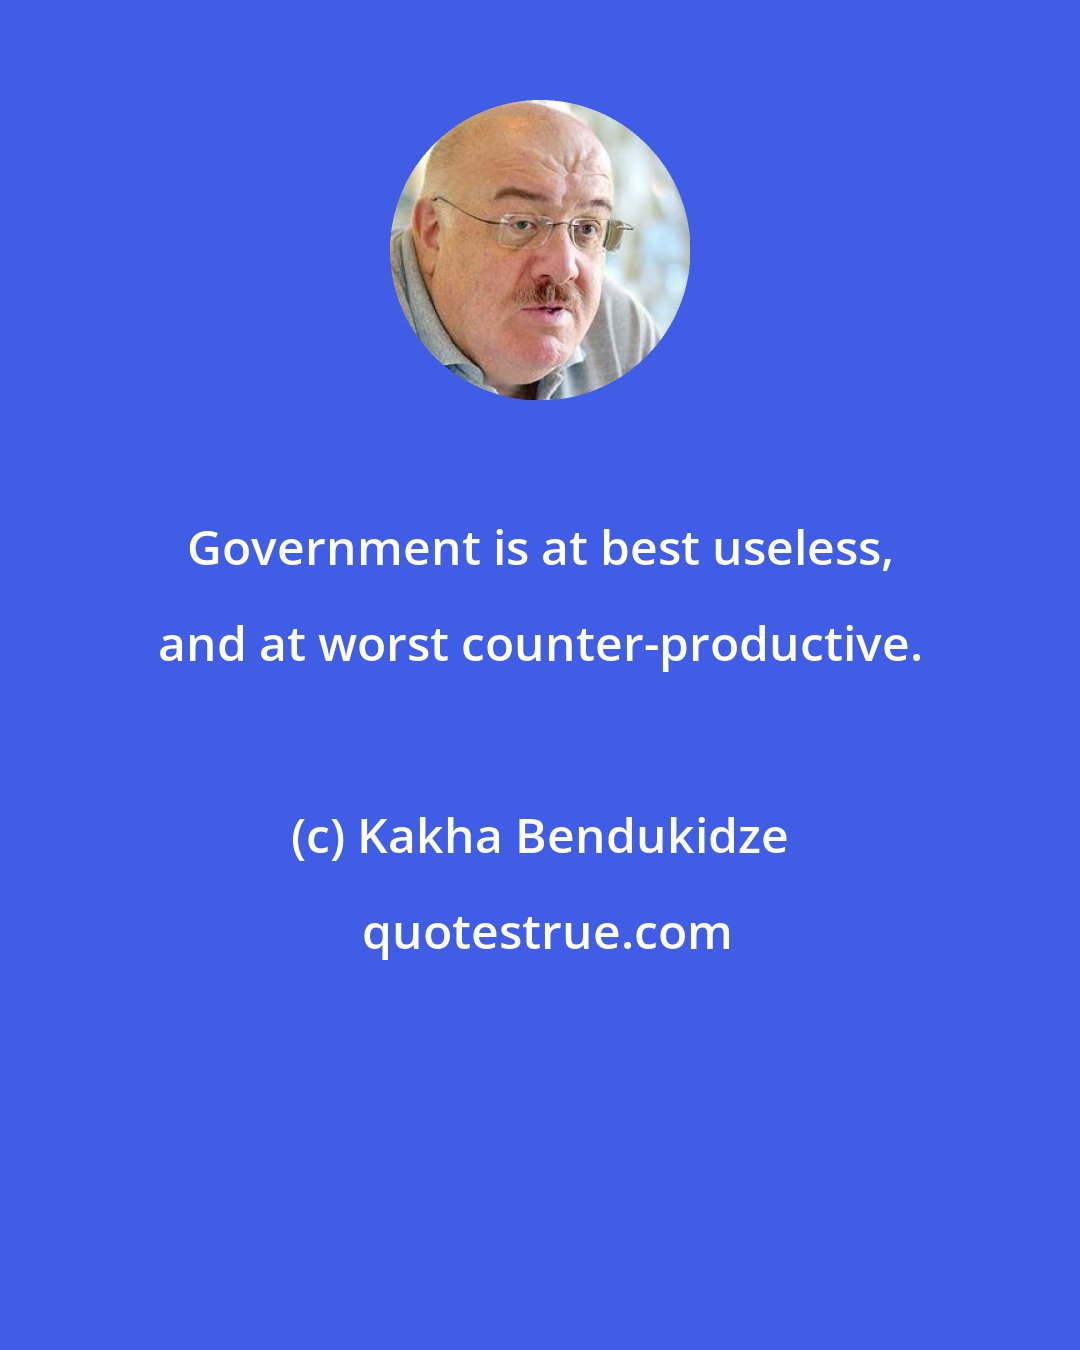 Kakha Bendukidze: Government is at best useless, and at worst counter-productive.